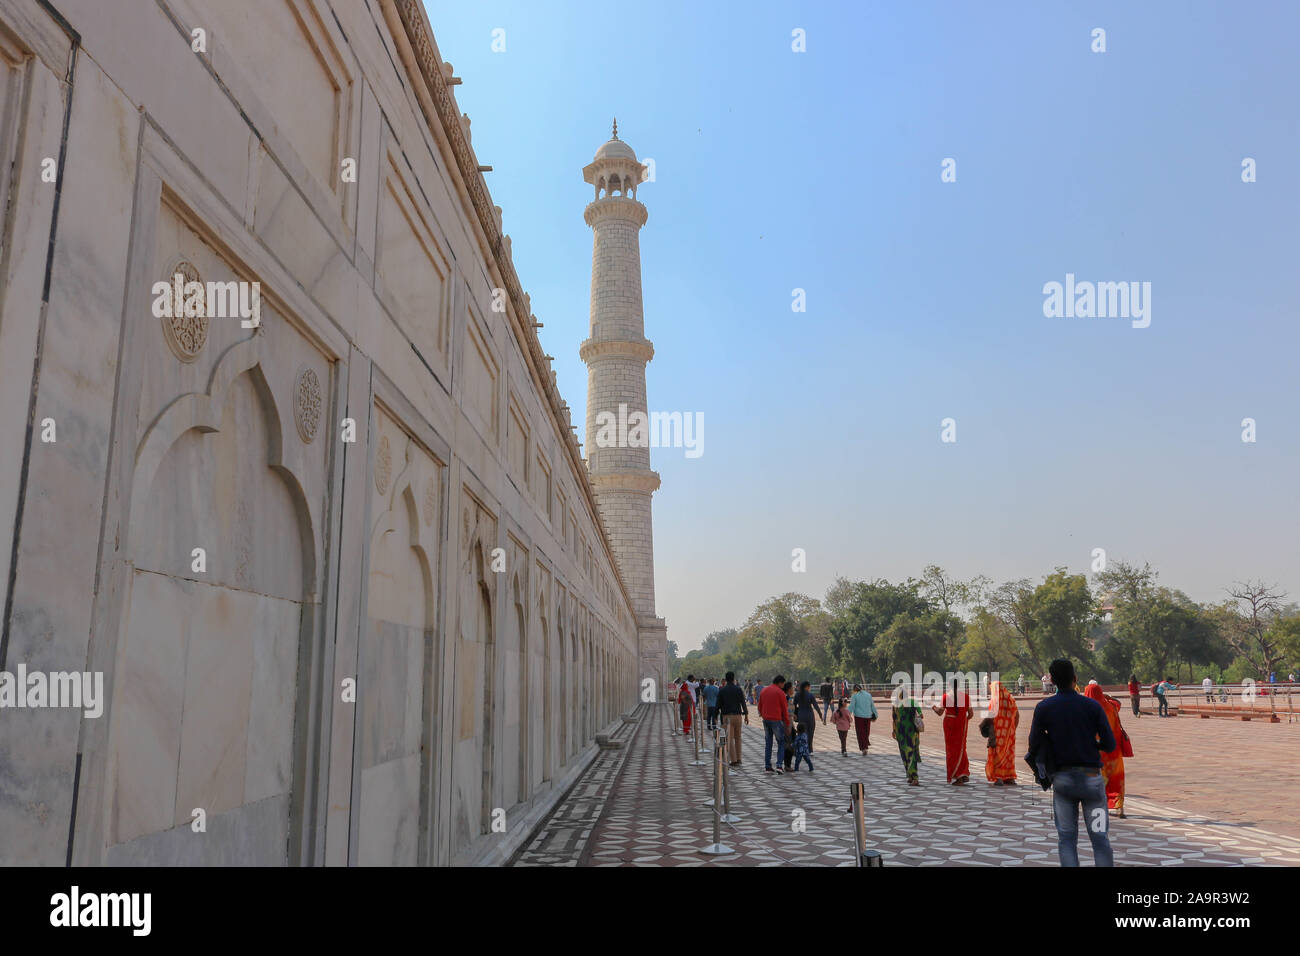 Decorated marble wall leading to one of the minaret of the Taj Mahal. Taj Mahal is an ivory-white marble mausoleum on the south bank of the Yamuna. Stock Photo